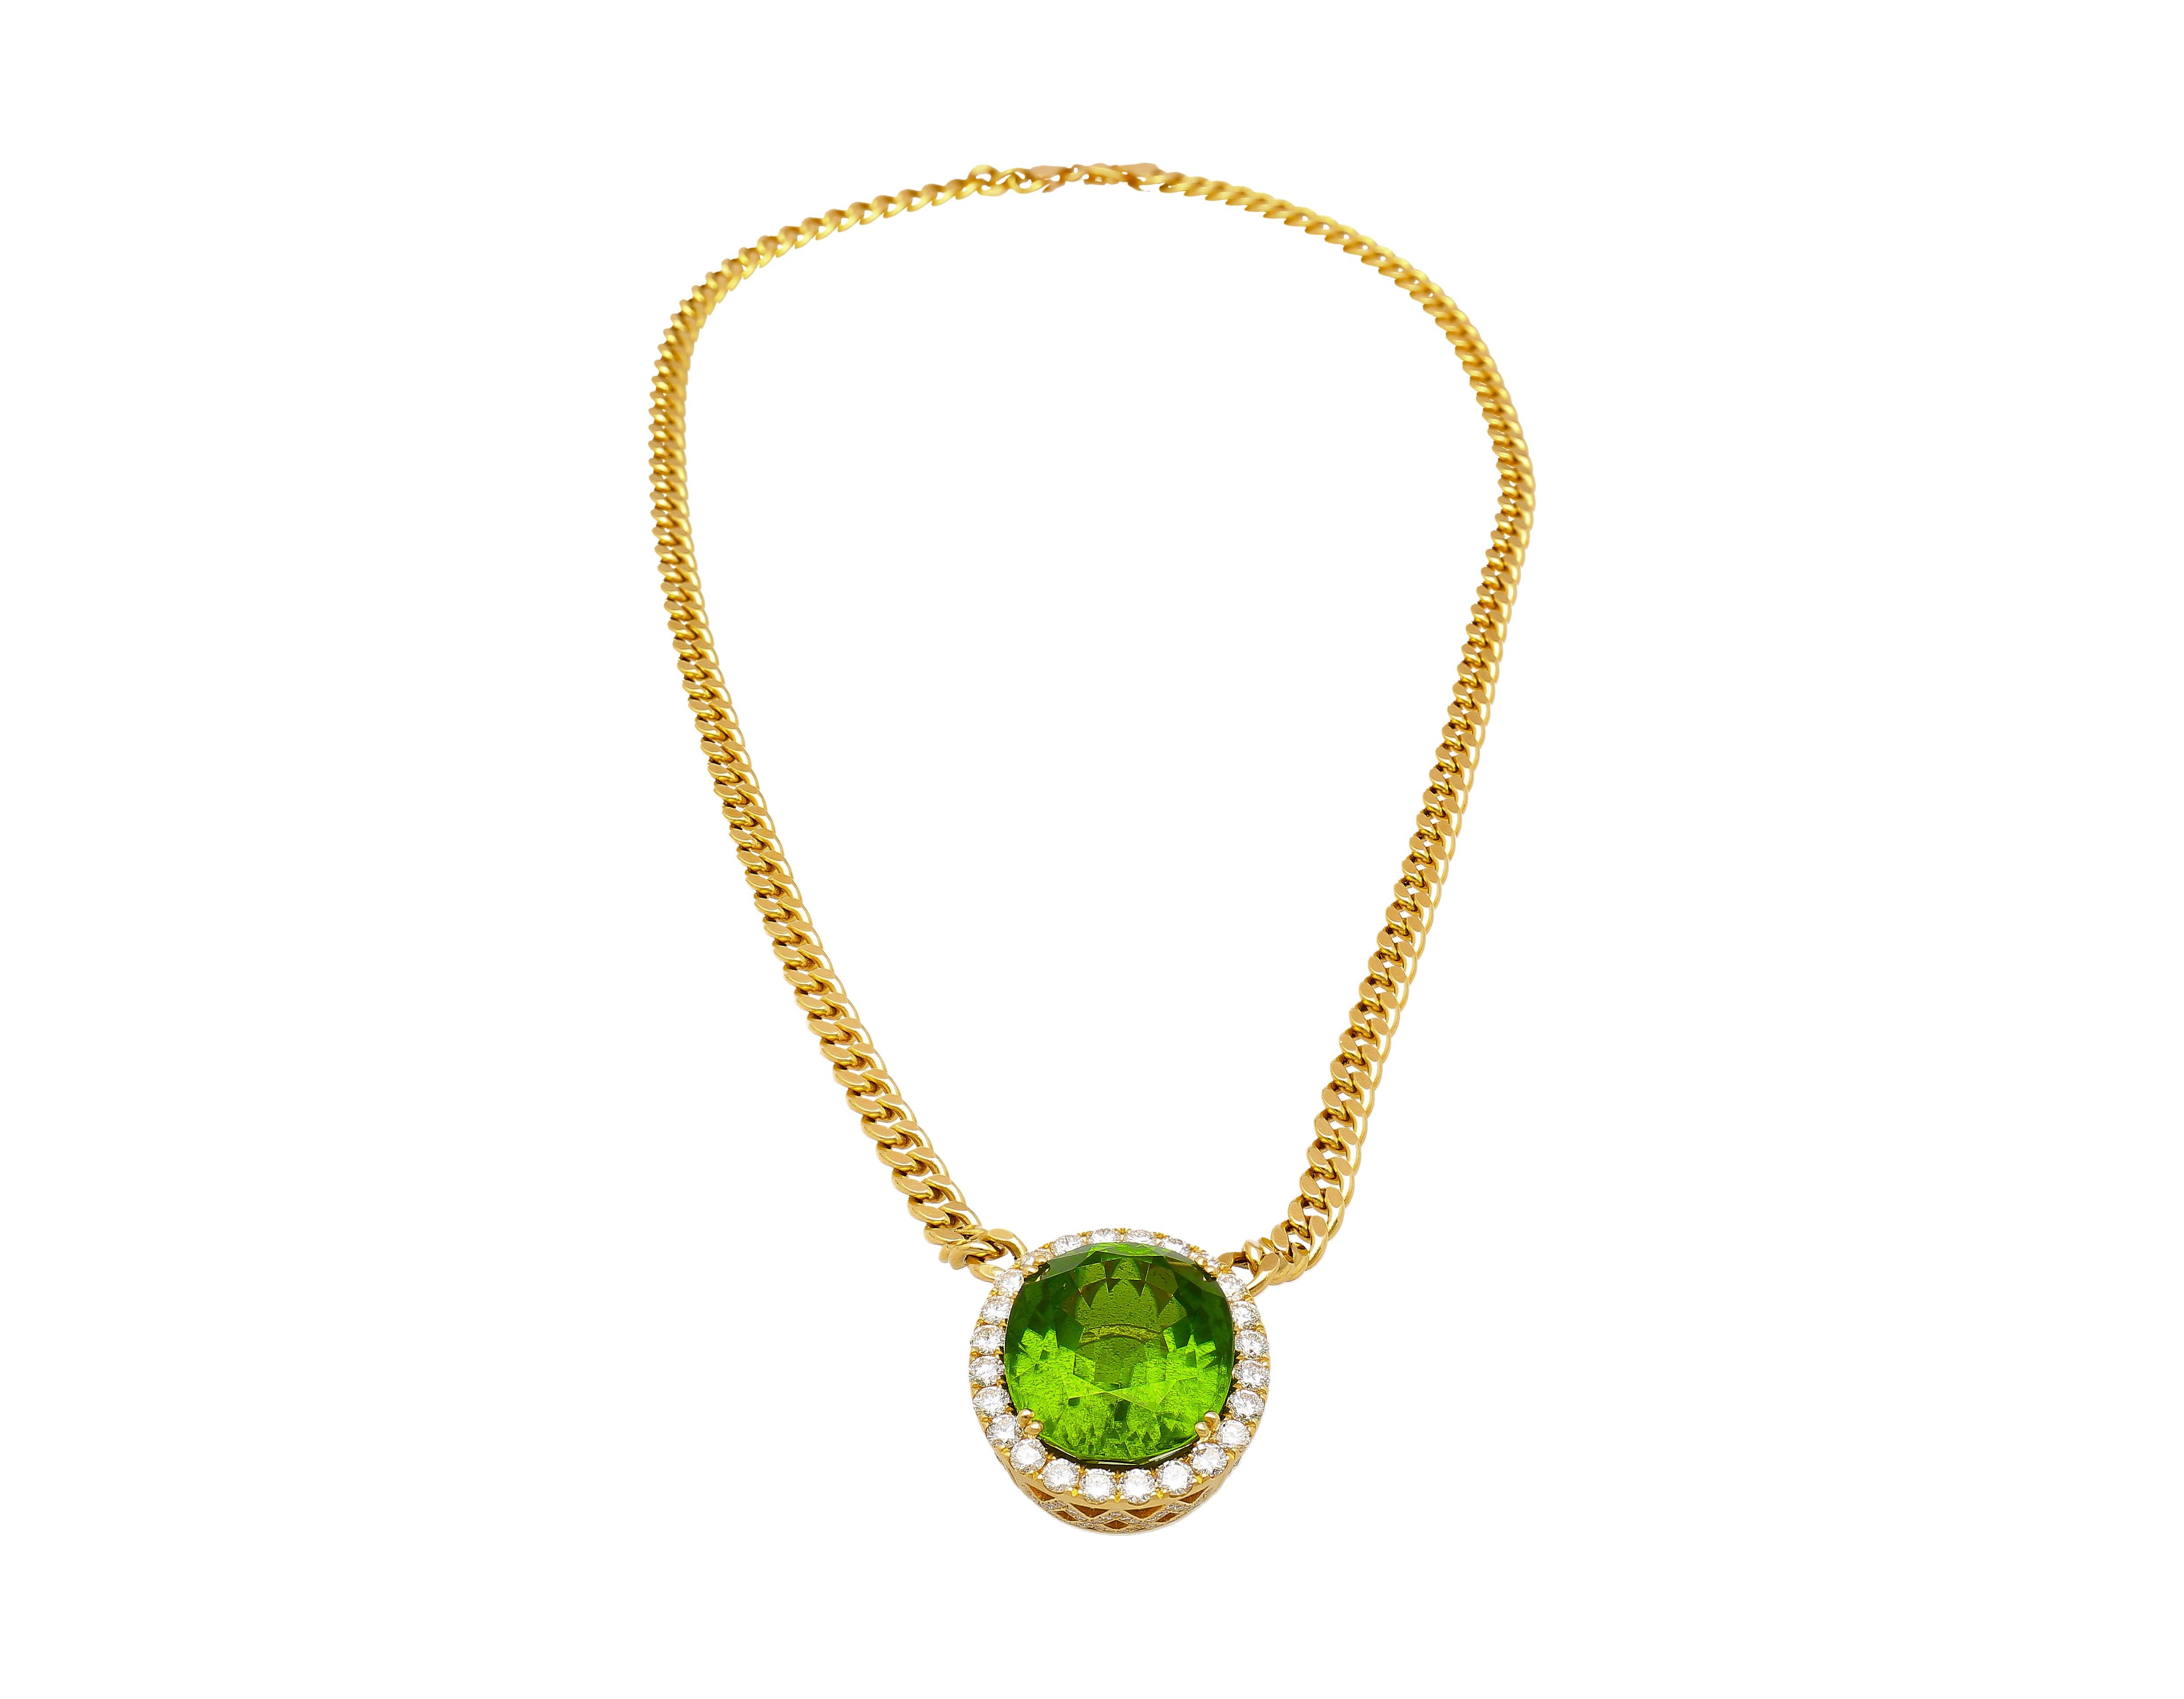 Oval Cut 51 Carat Green Peridot Pendant with Diamond Halo in 18K Gold Cuban Chain For Sale